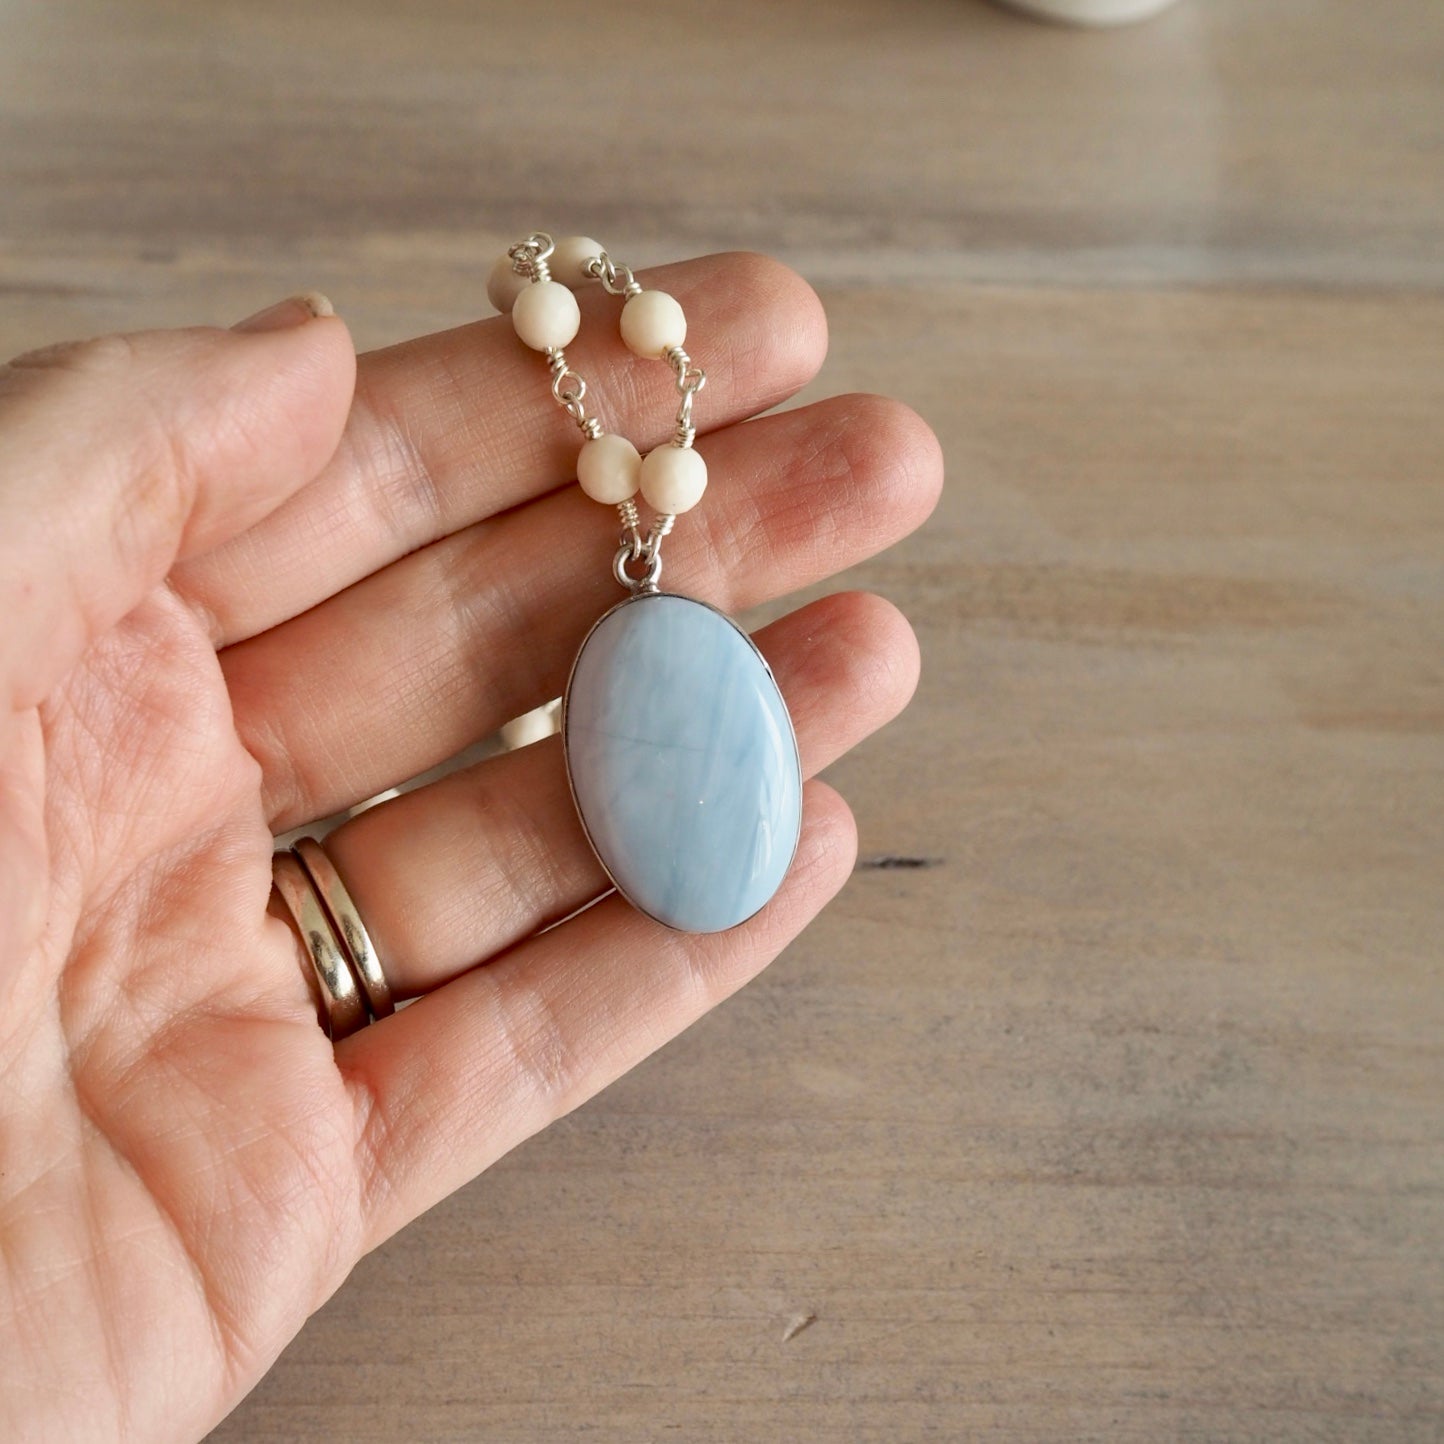 Blue Lace Agate Sterling Silver Pendant and Riverstone